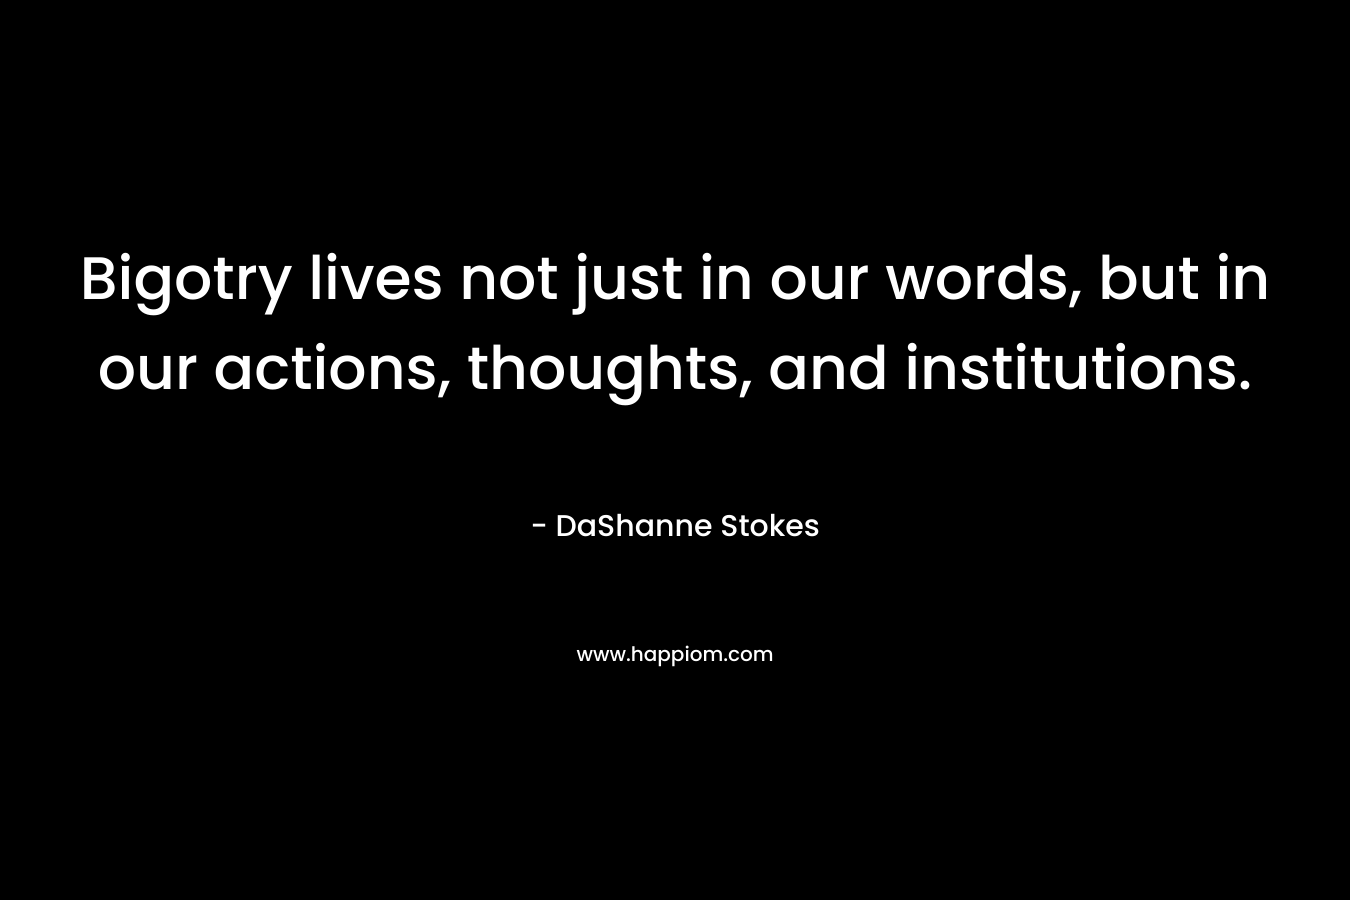 Bigotry lives not just in our words, but in our actions, thoughts, and institutions. – DaShanne Stokes